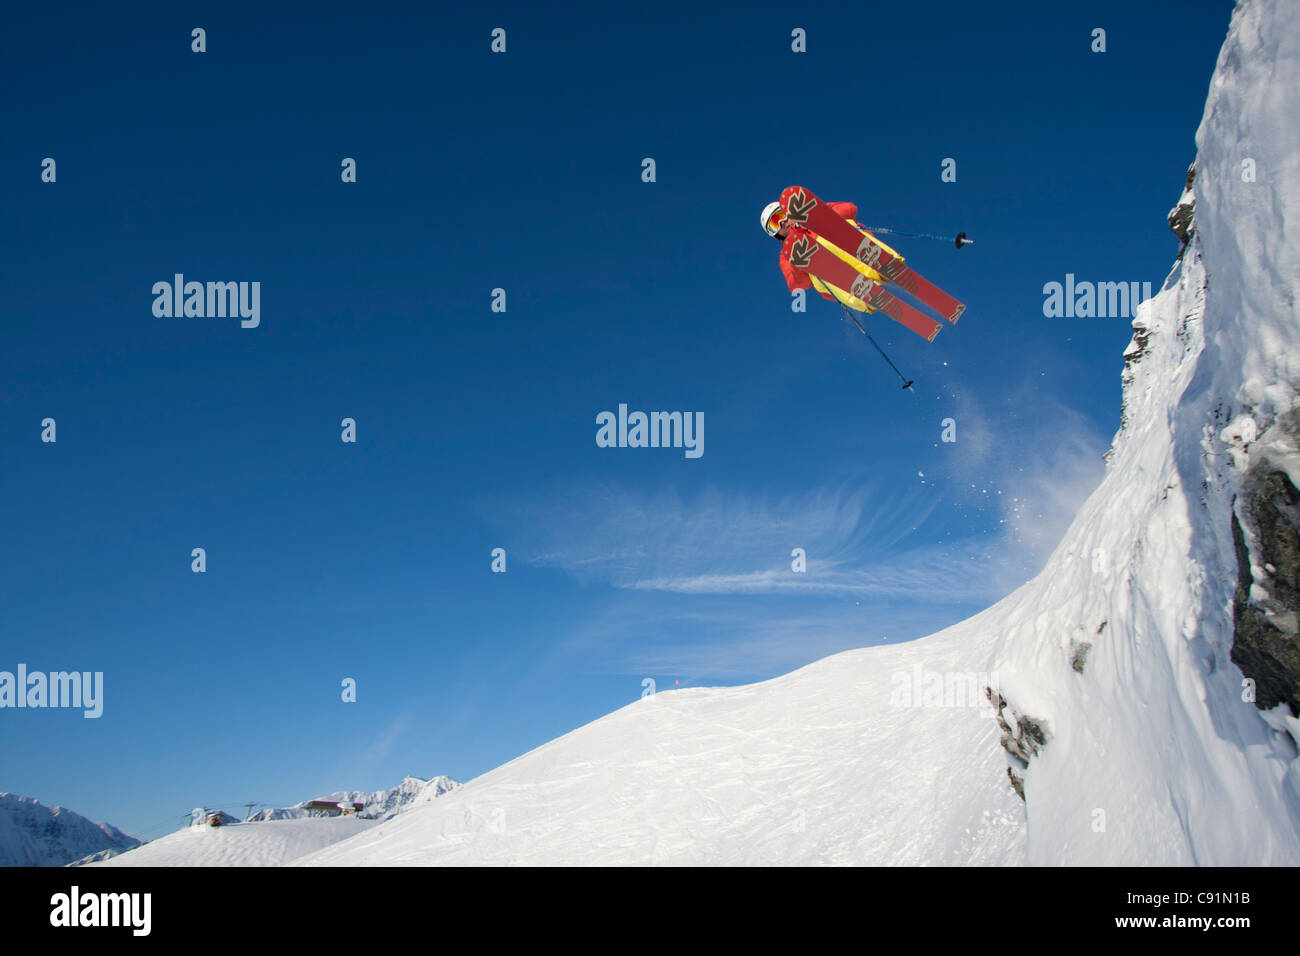 Downhill skier makes an extreme jump from a ledge while skiing at Alyeska Resort, Southcentral Alaska, Winter Stock Photo